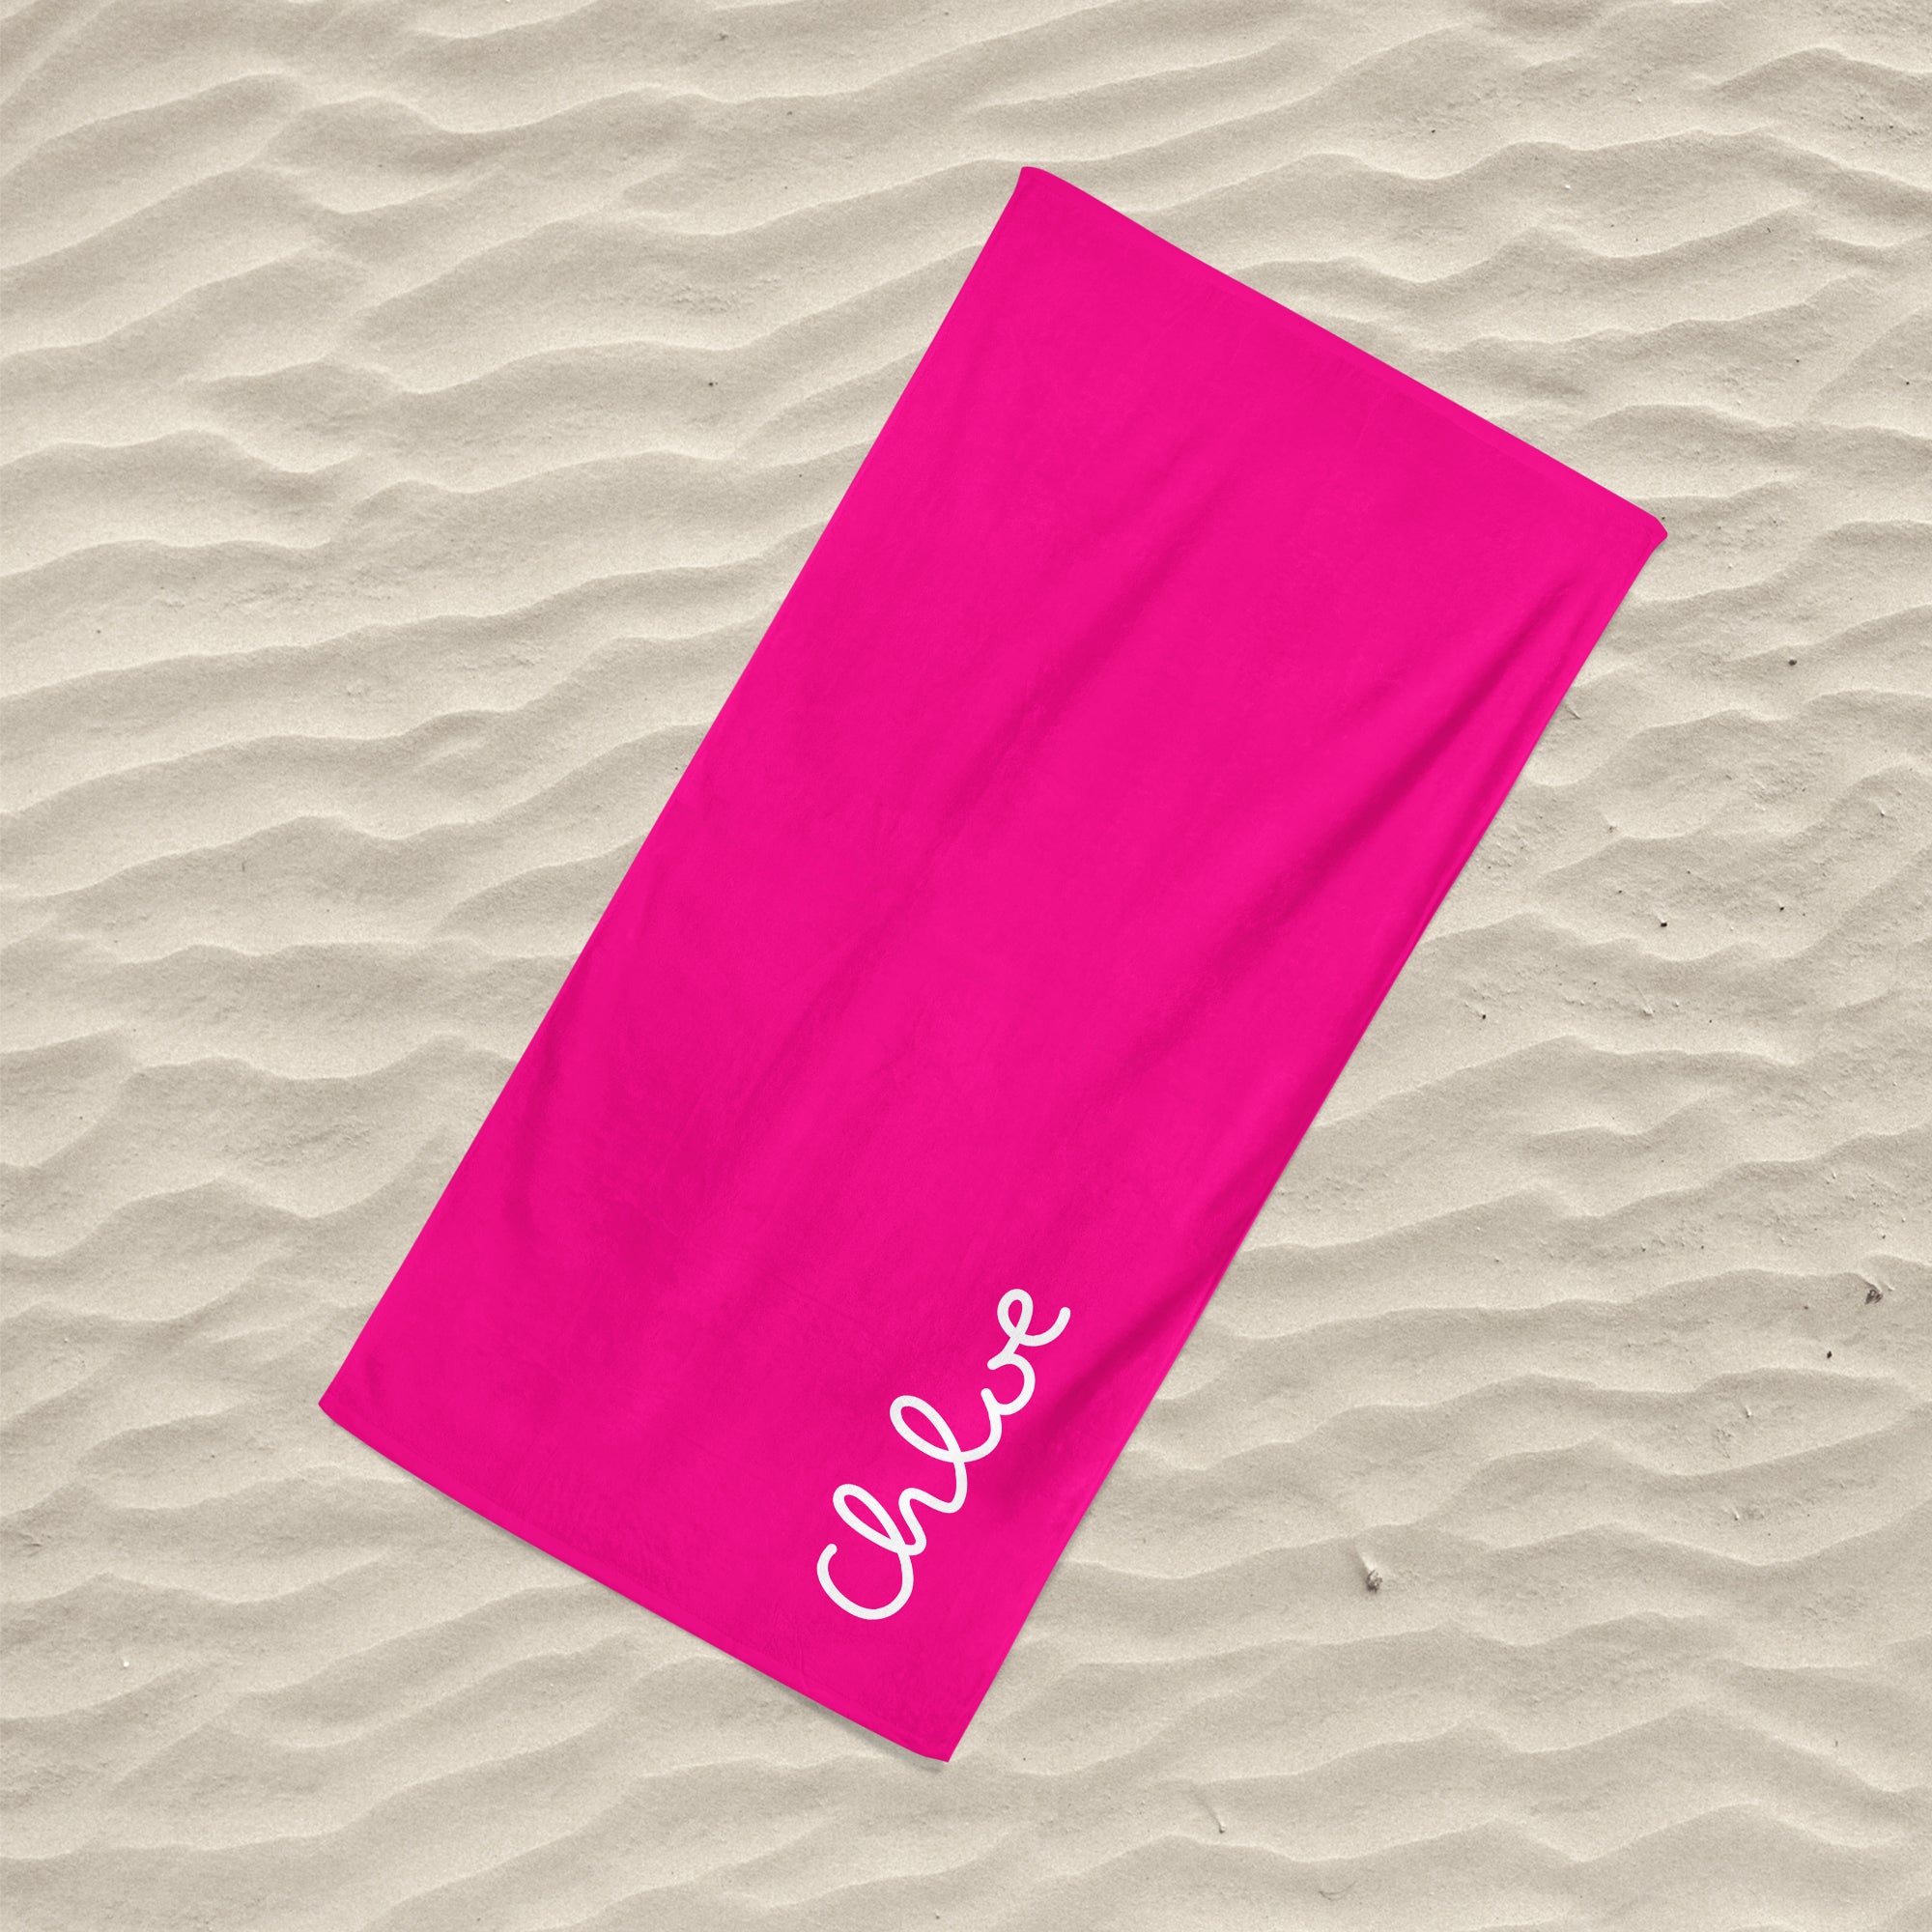 Island Inspired Beach Towel White on Pink - Personalise with Name